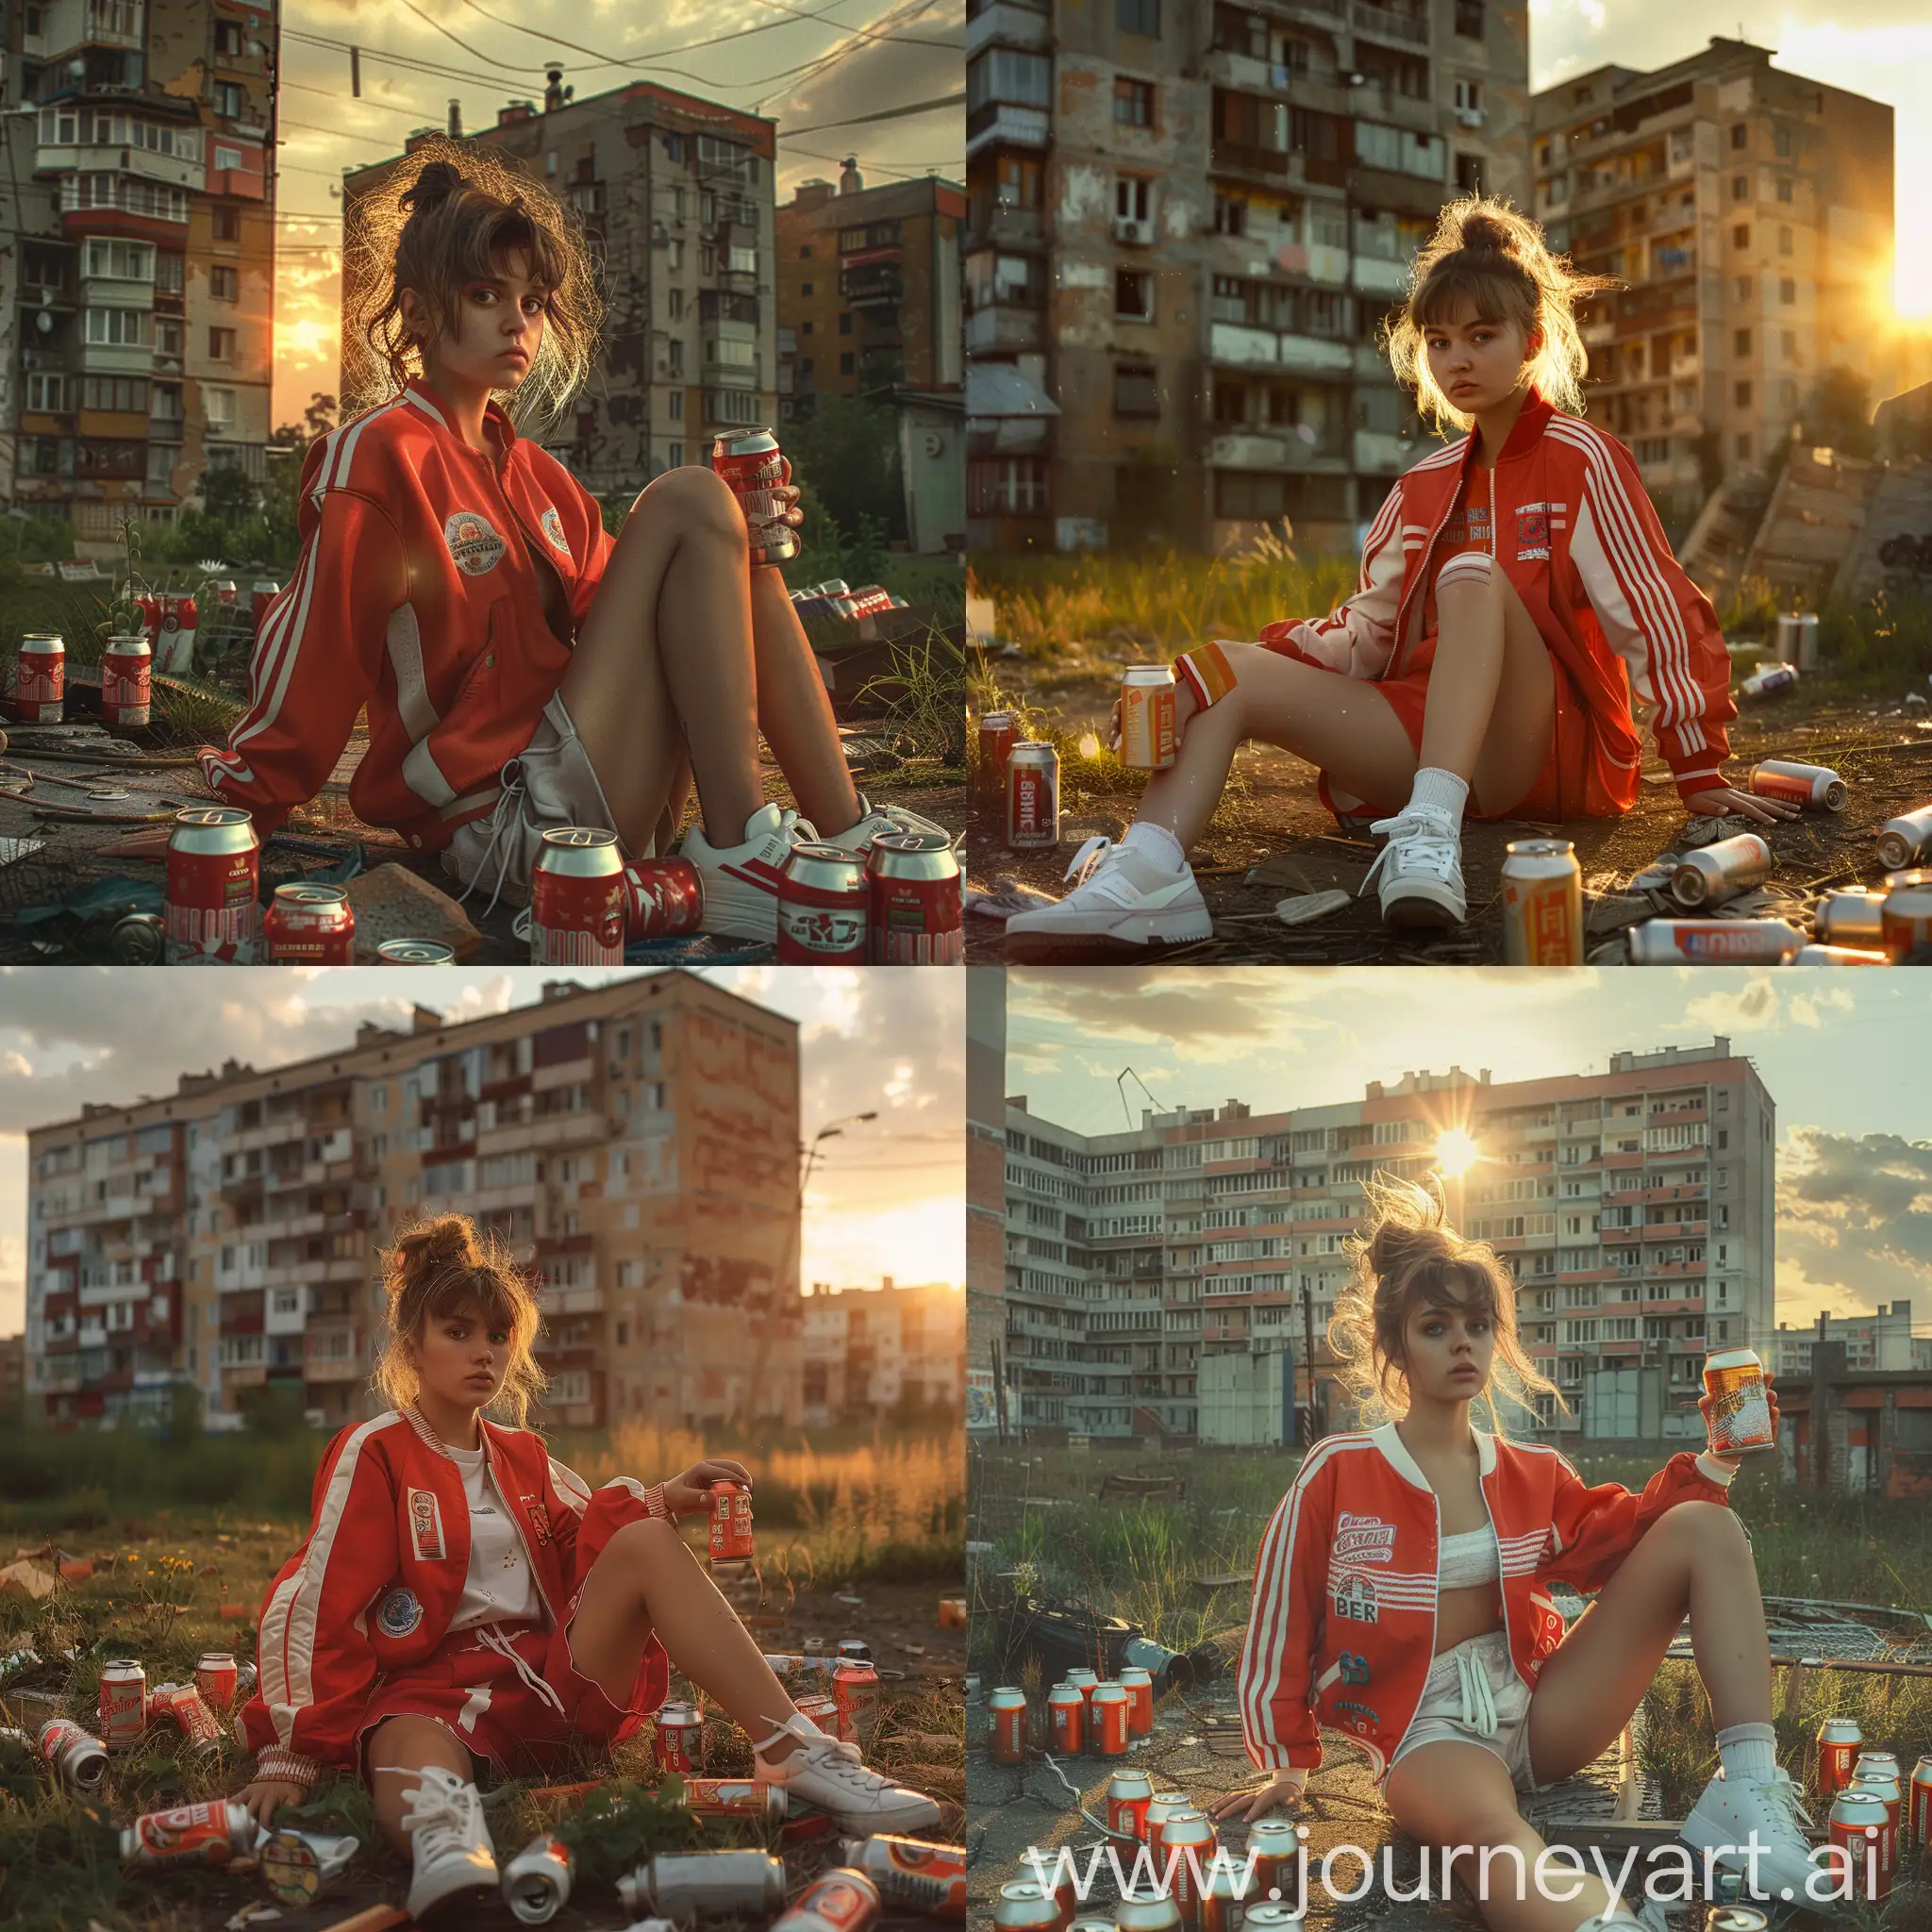 Create an image of a young woman sitting outdoors in an urban setting during sunset, reminiscent of post-Soviet aesthetics. She is wearing a vintage red track jacket with white stripes, sporty shorts, and white sneakers. Her hair is in a messy bun, and she holds a can of beer. Surrounding her are more beer cans, hinting at a casual gathering. The background features a large, weathered apartment building, typical of Eastern European architecture, with the sun setting behind it and casting a warm glow. The overall mood should evoke a sense of youthful rebellion and nostalgia, blending vibrant colors with the rough, gritty texture of urban decay.